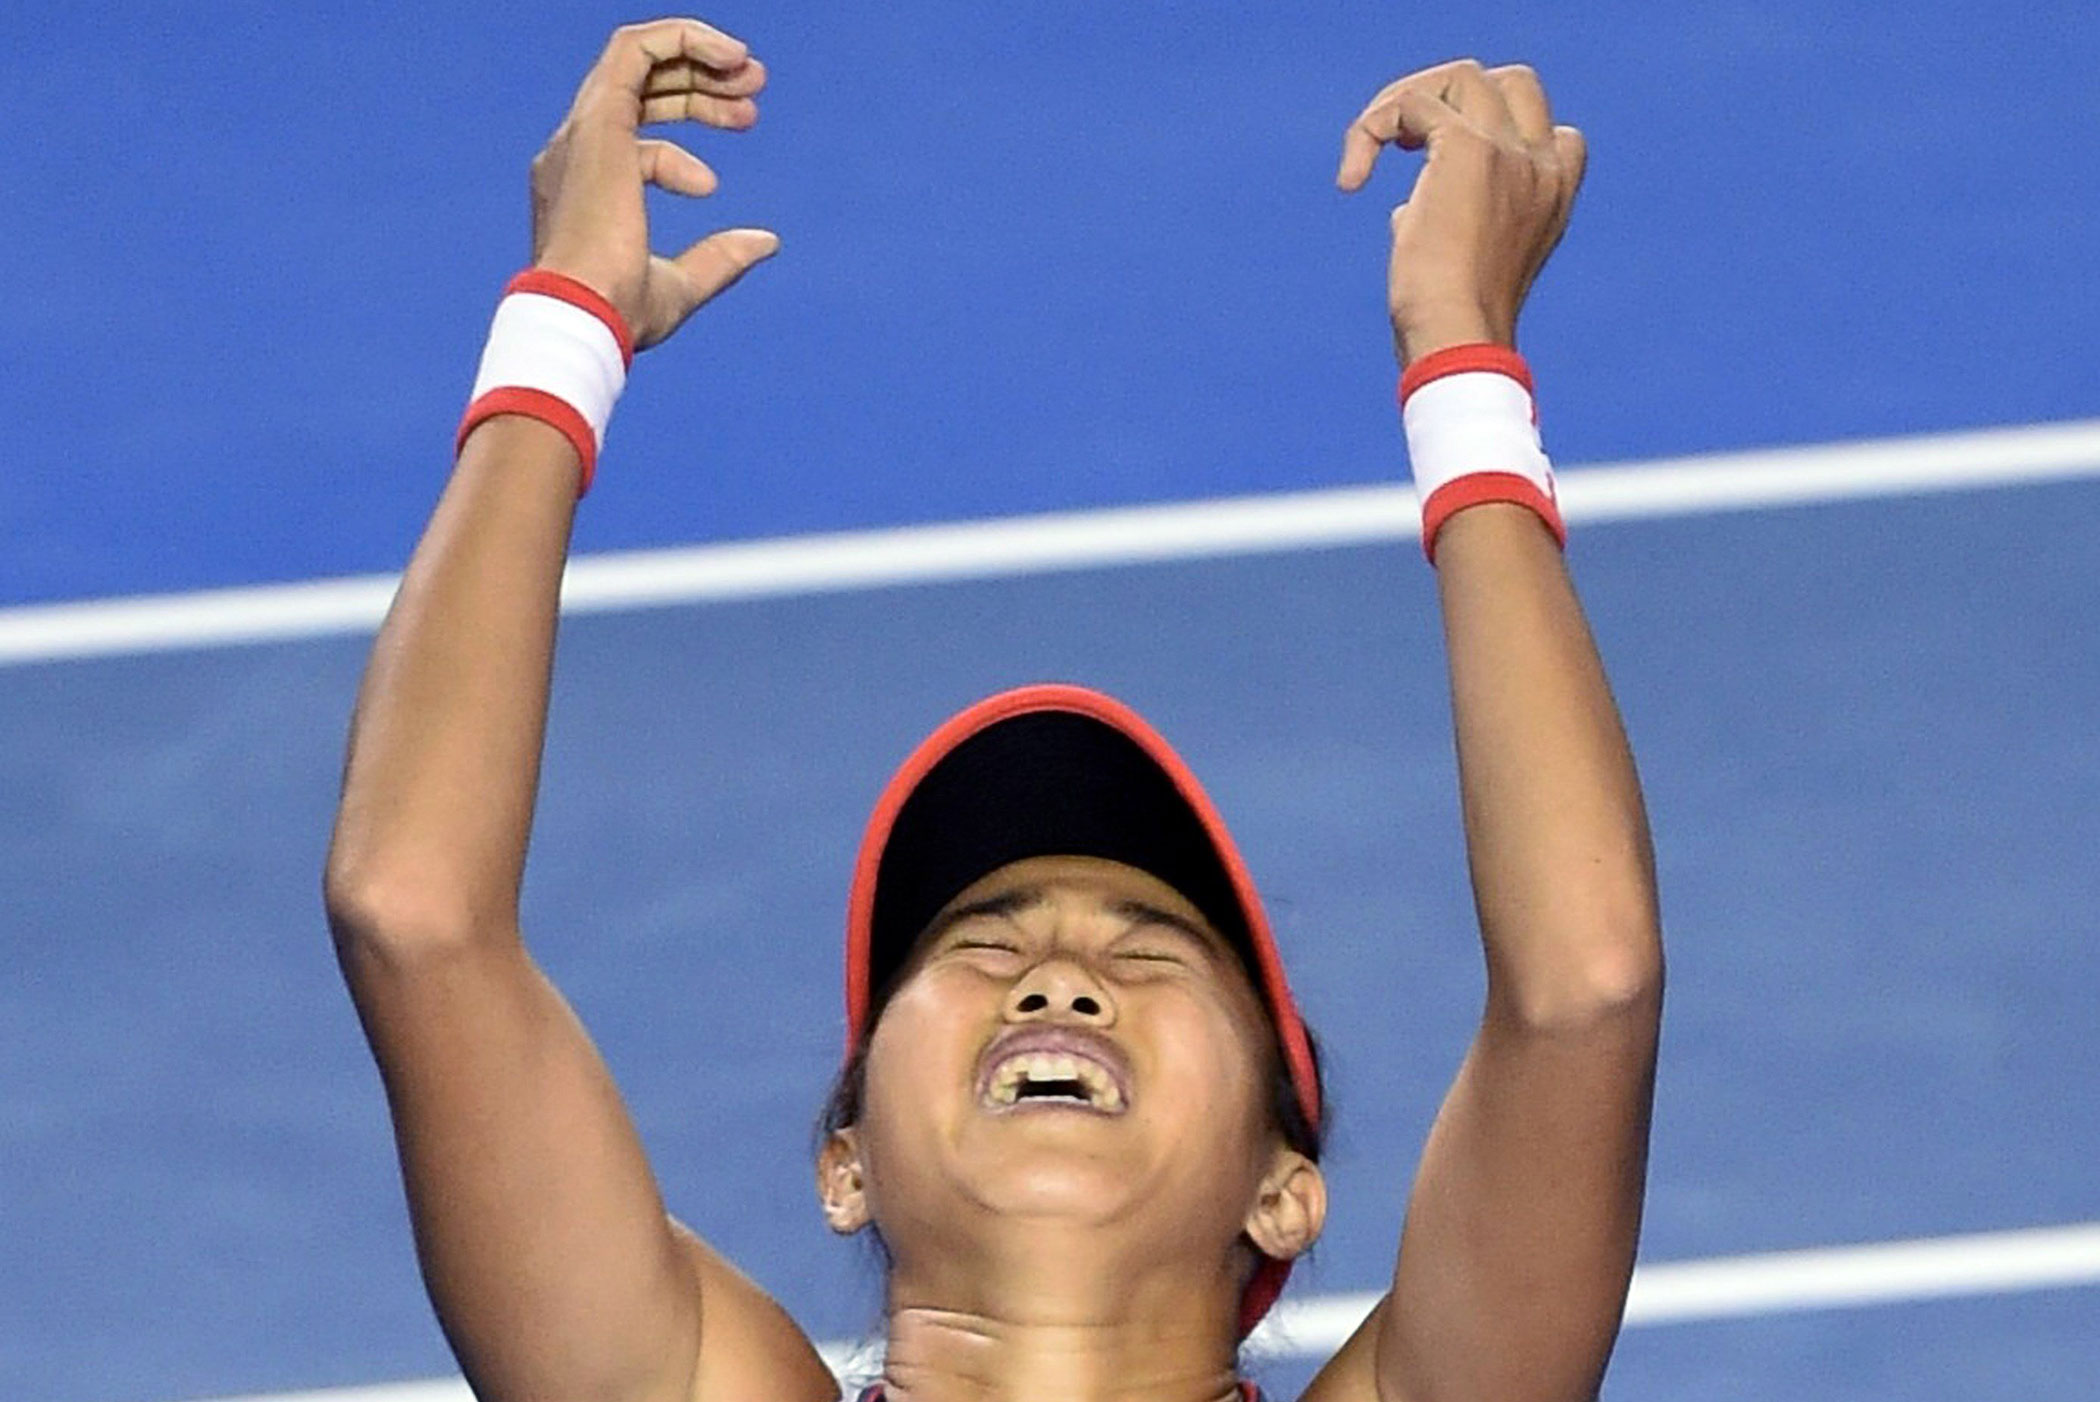 2016 Australian Open China's Zhang Shuai celebrates her victory in her women's singles match against United States' Madison Keys on Jan. 26.